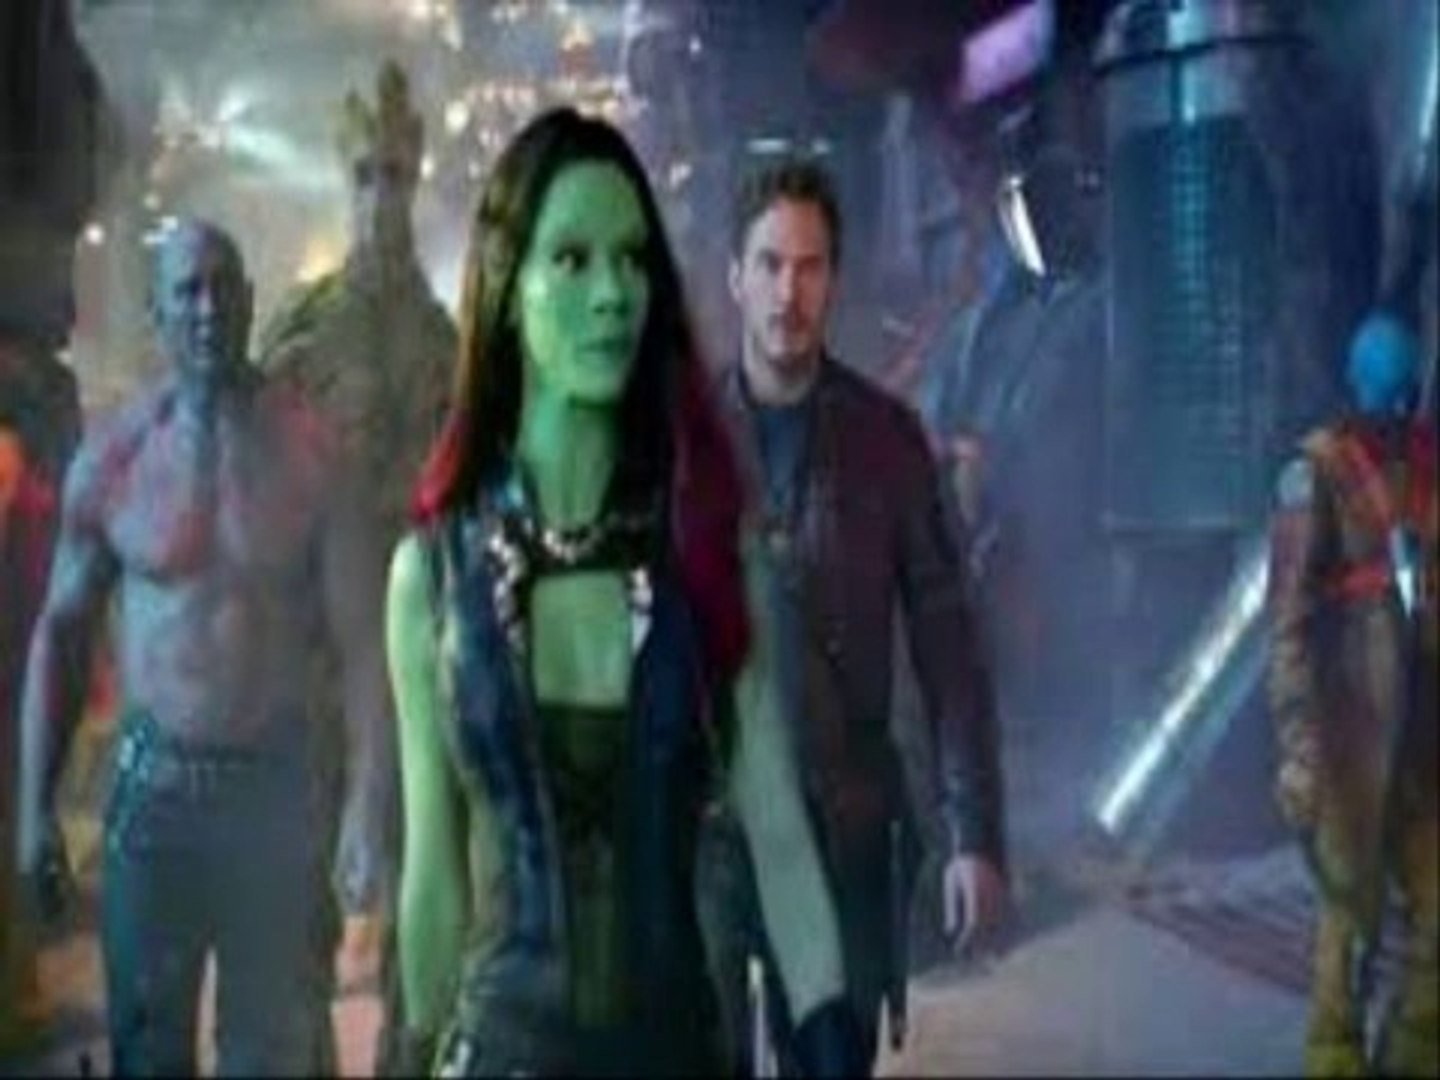 Blades of the Guardians - Official Trailer (4K) - video Dailymotion